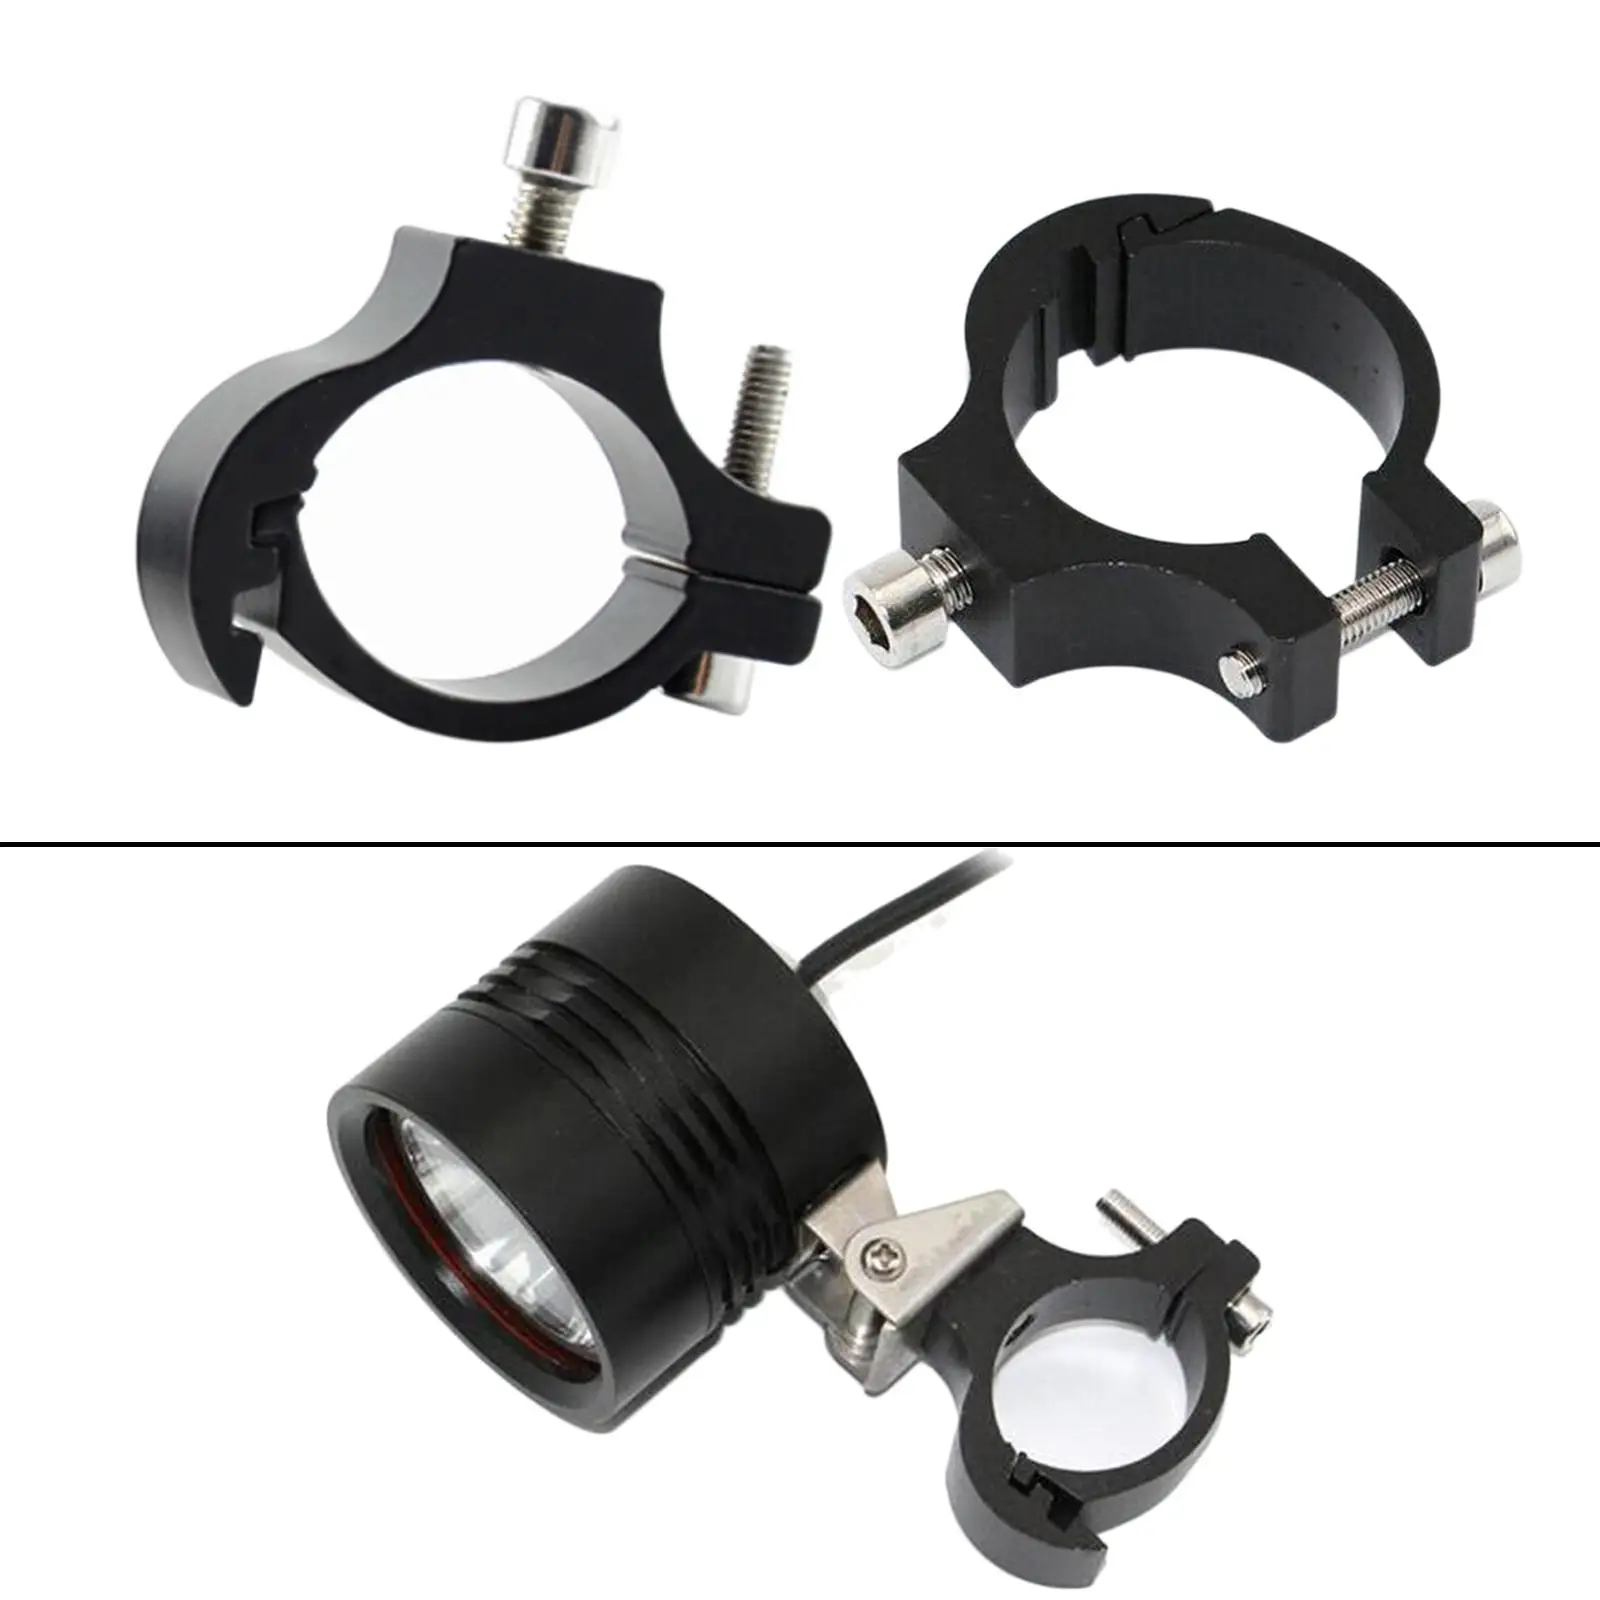 Universal Metal Motorcycle Modified Headlight Mount Brackets Clamp Fork Ear for Motorcycle